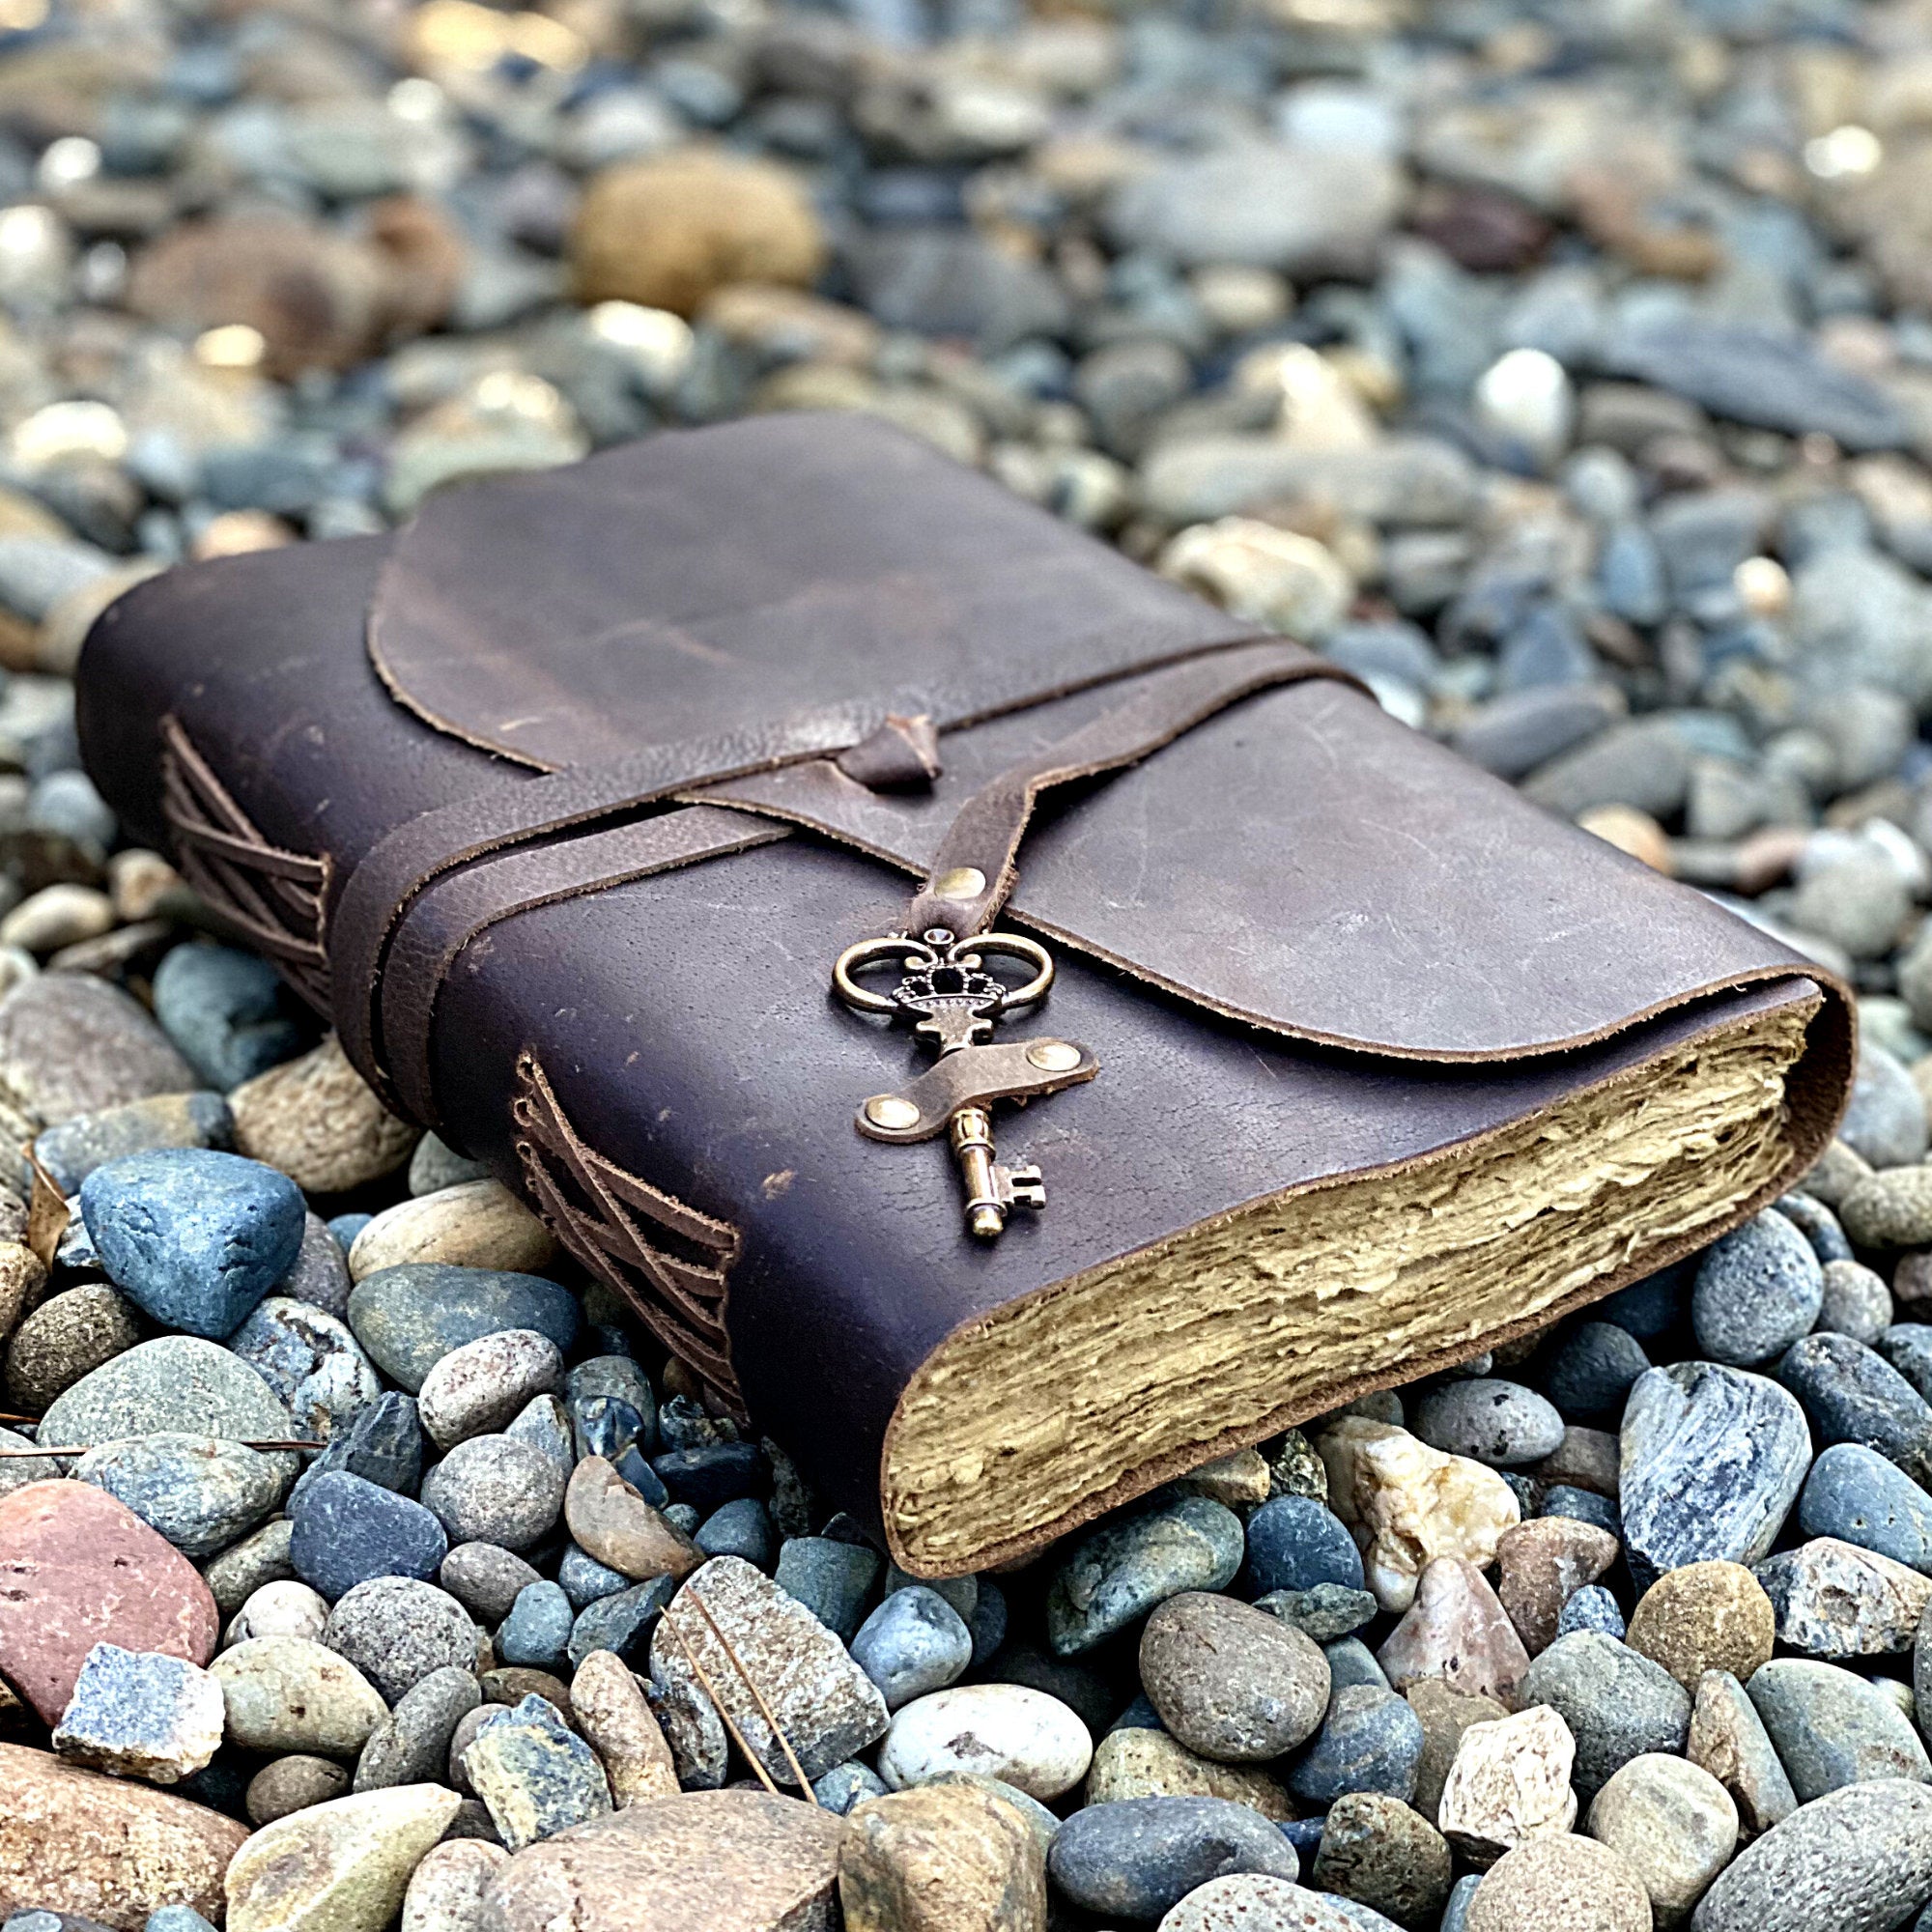 Leather Journal for Women - Vintage Leather Bound Journal